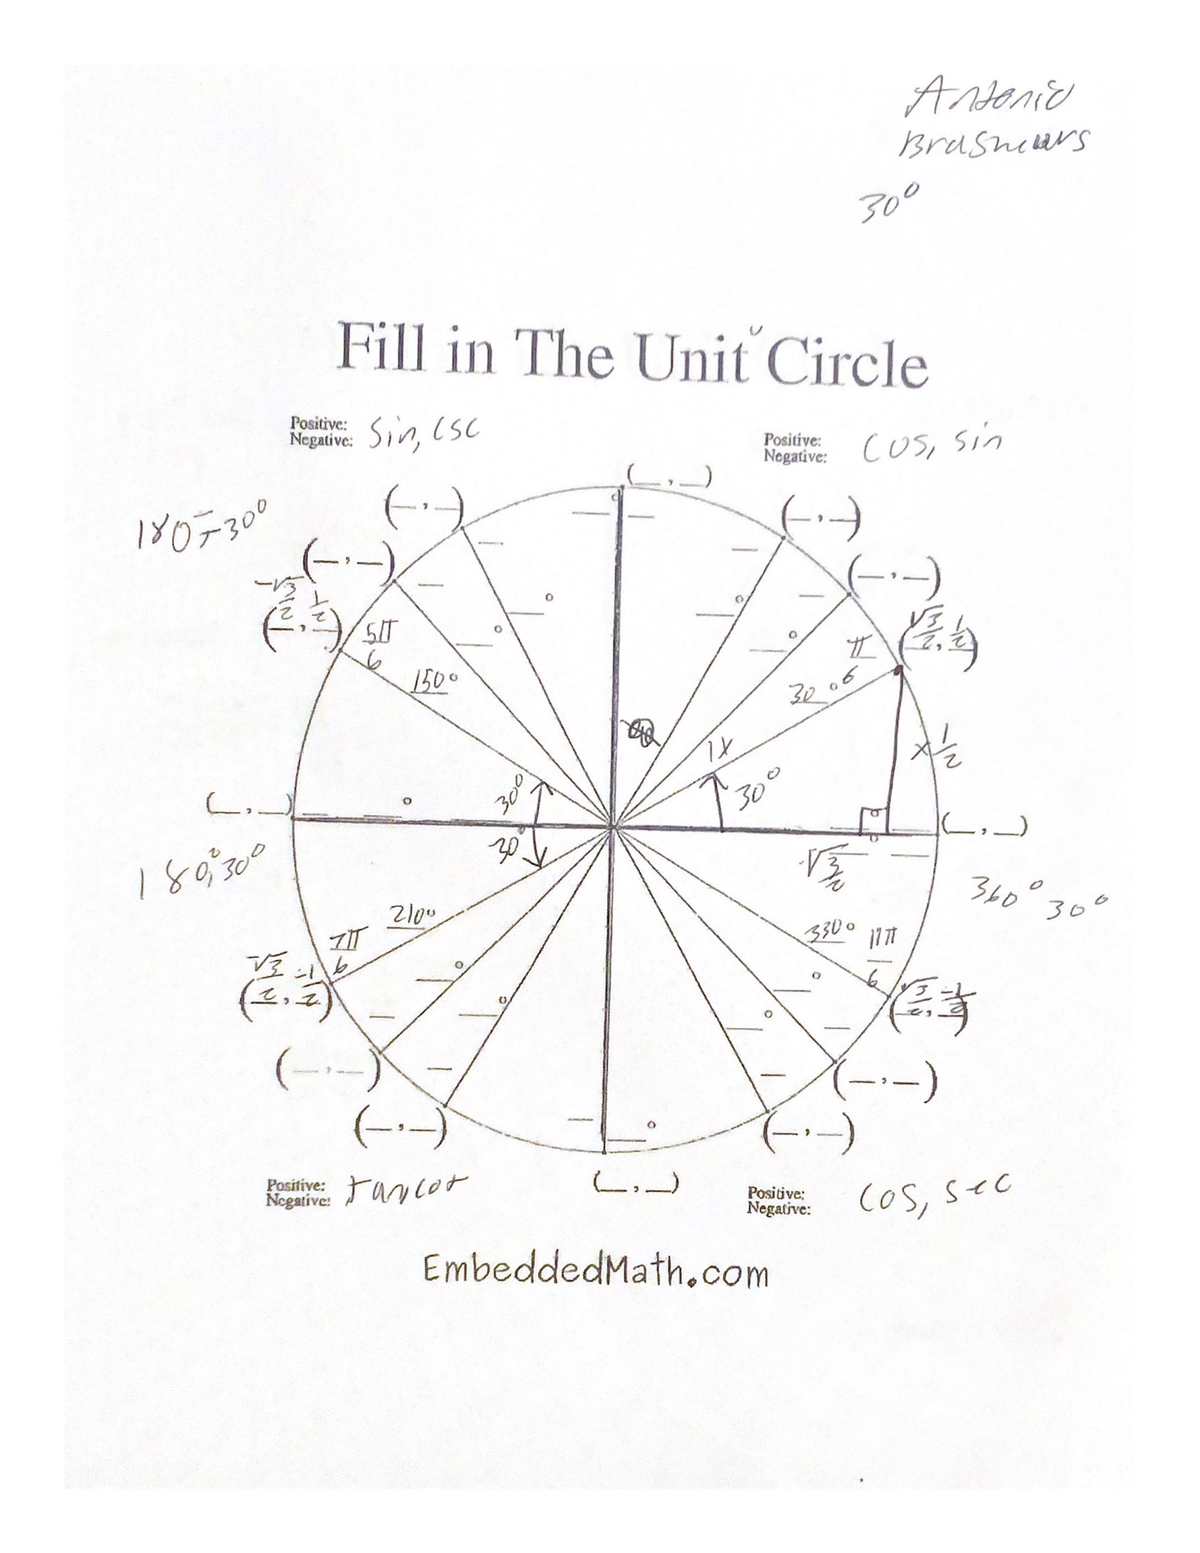 Fill in The Unit Circle complete - MATH 460 - Studocu